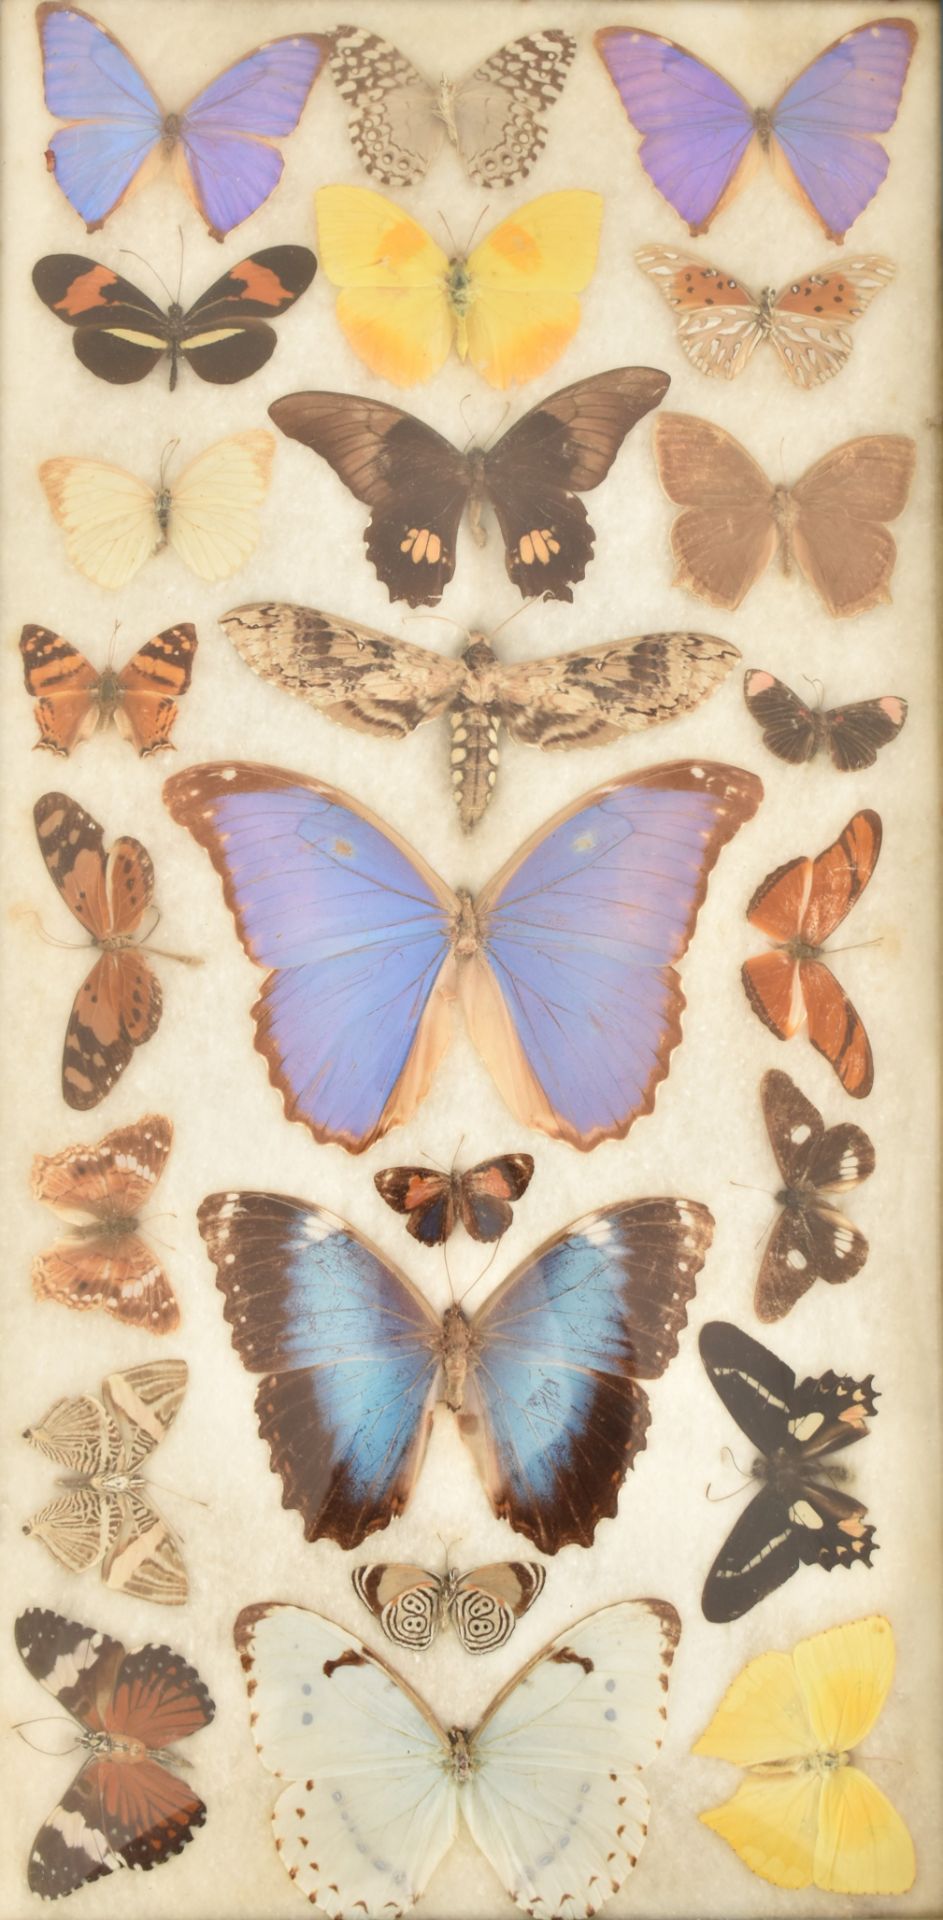 ENTOMOLOGY - COLLECTION OF TAXIDERMY BUTTERFLY SPECIMENS